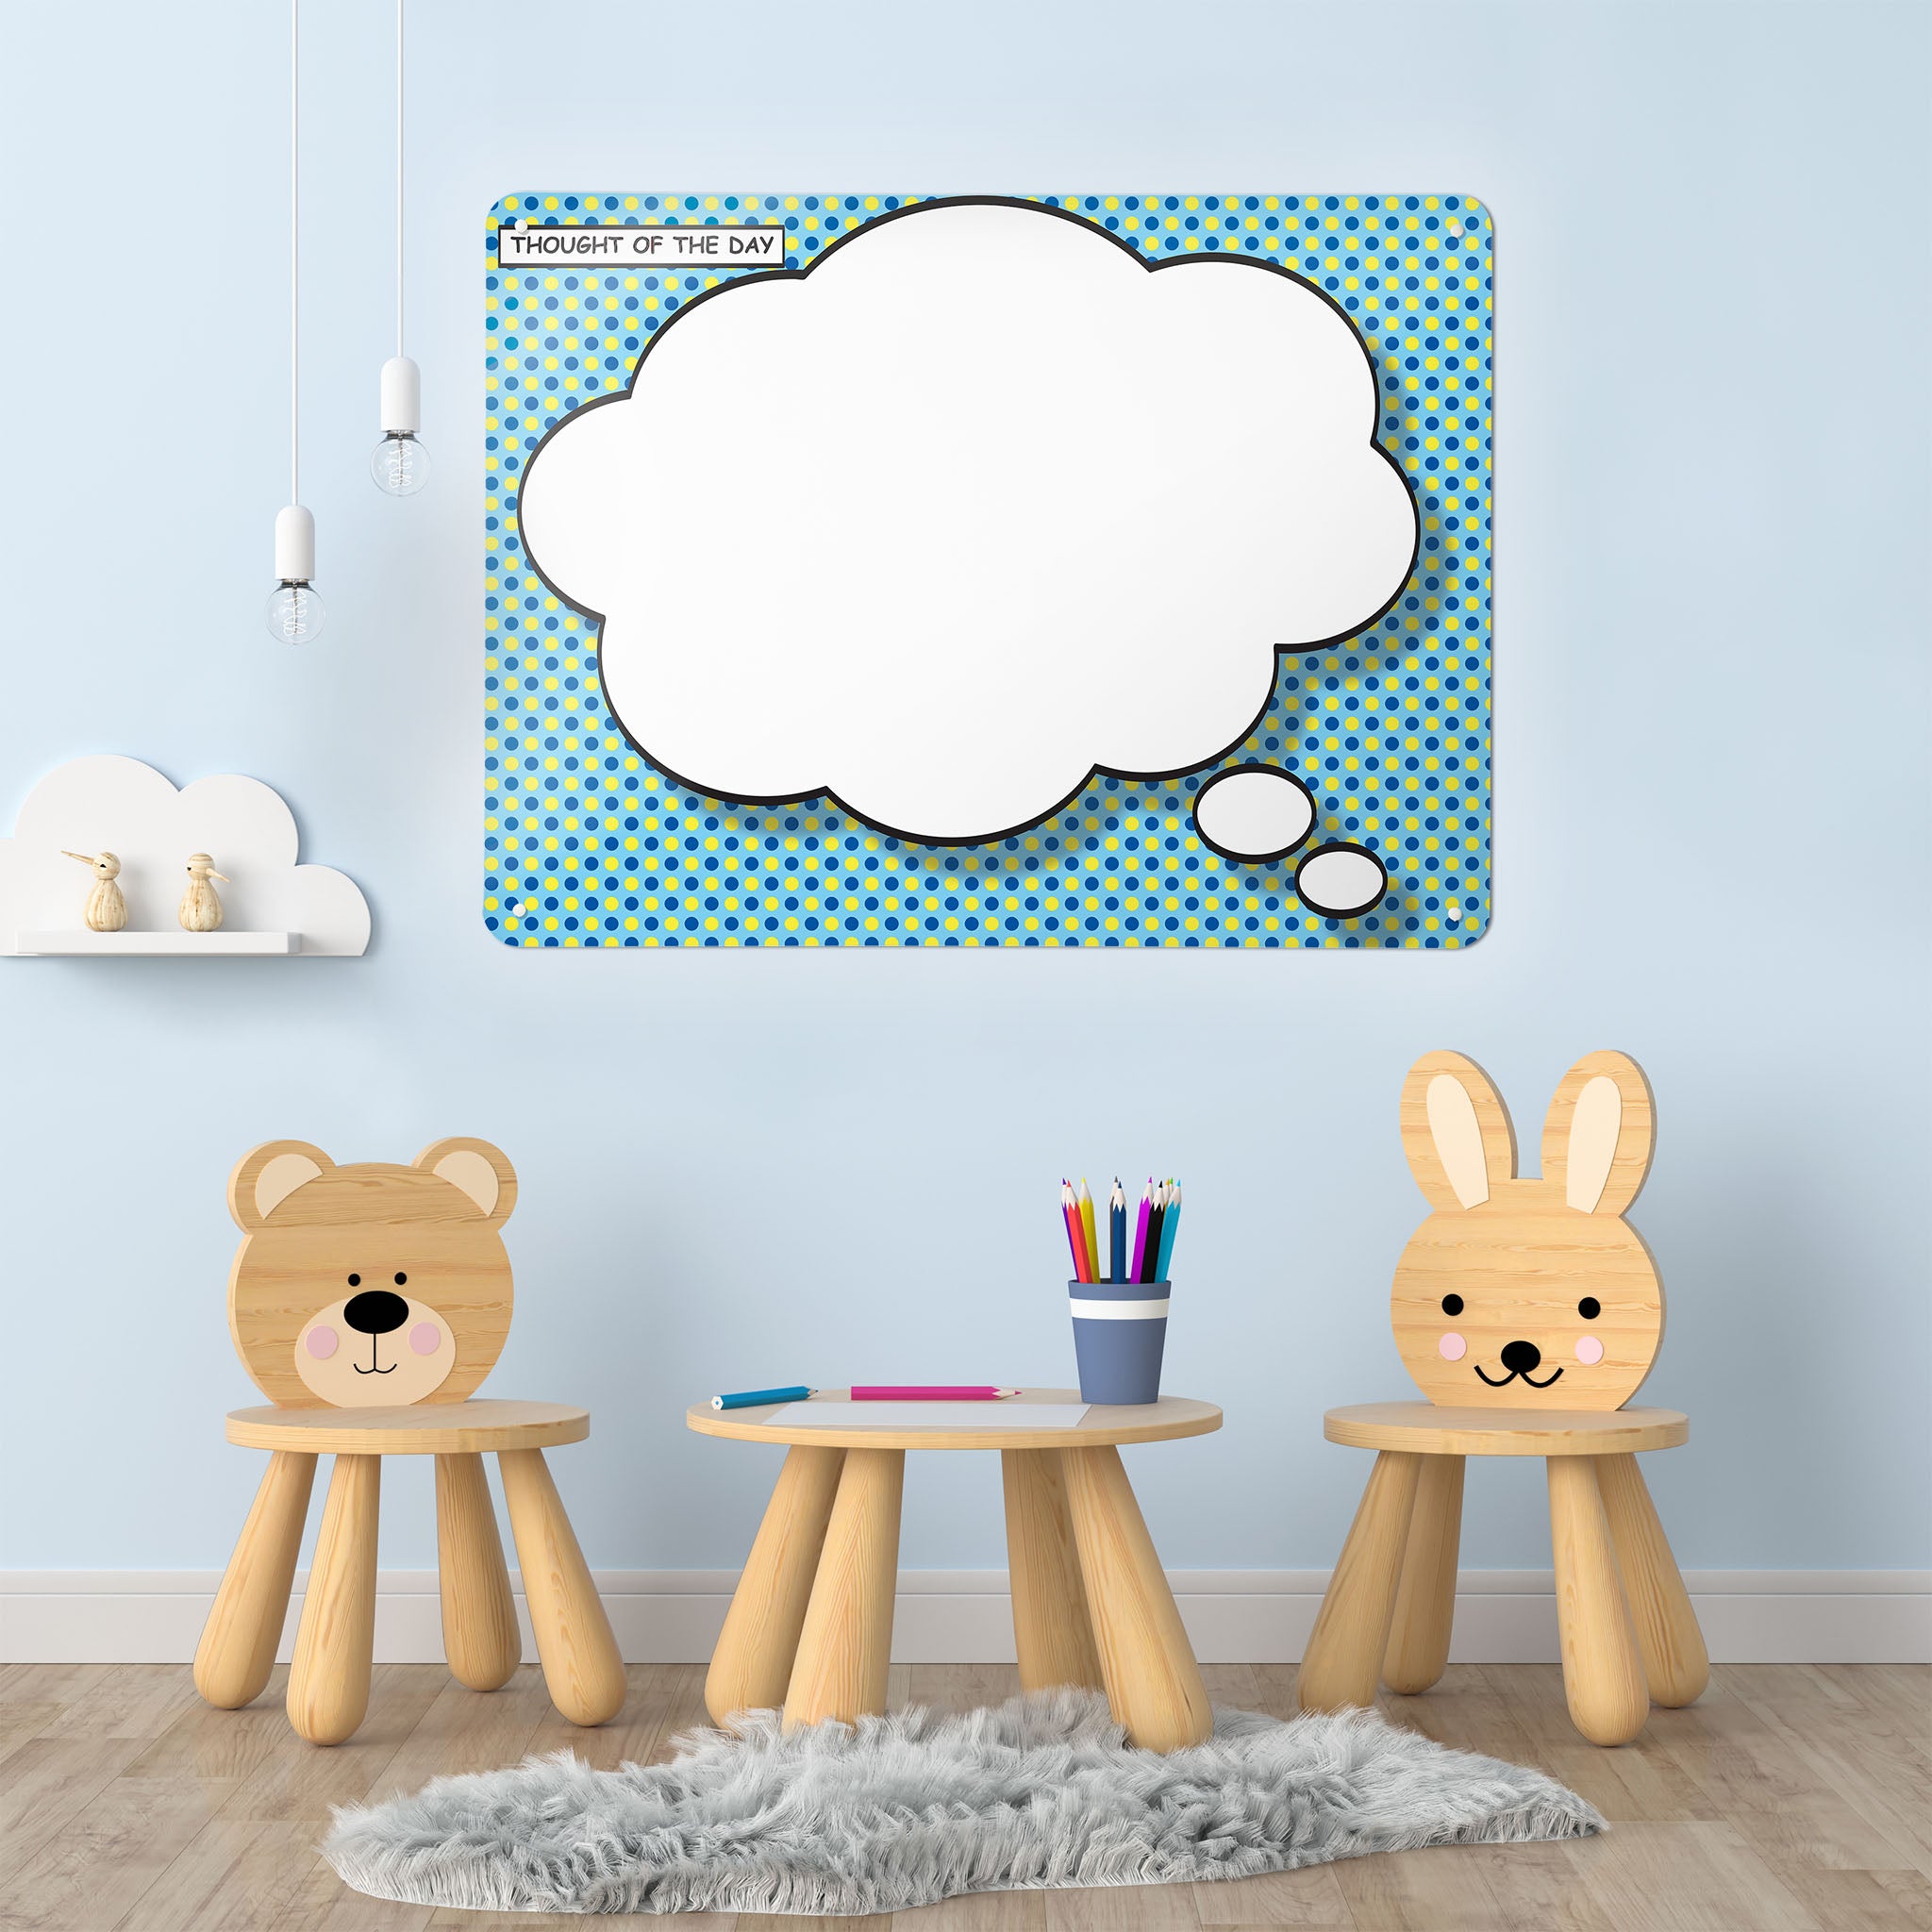 A playroom interior with a magnetic metal wall art panel showing a cartoon thought bubble design